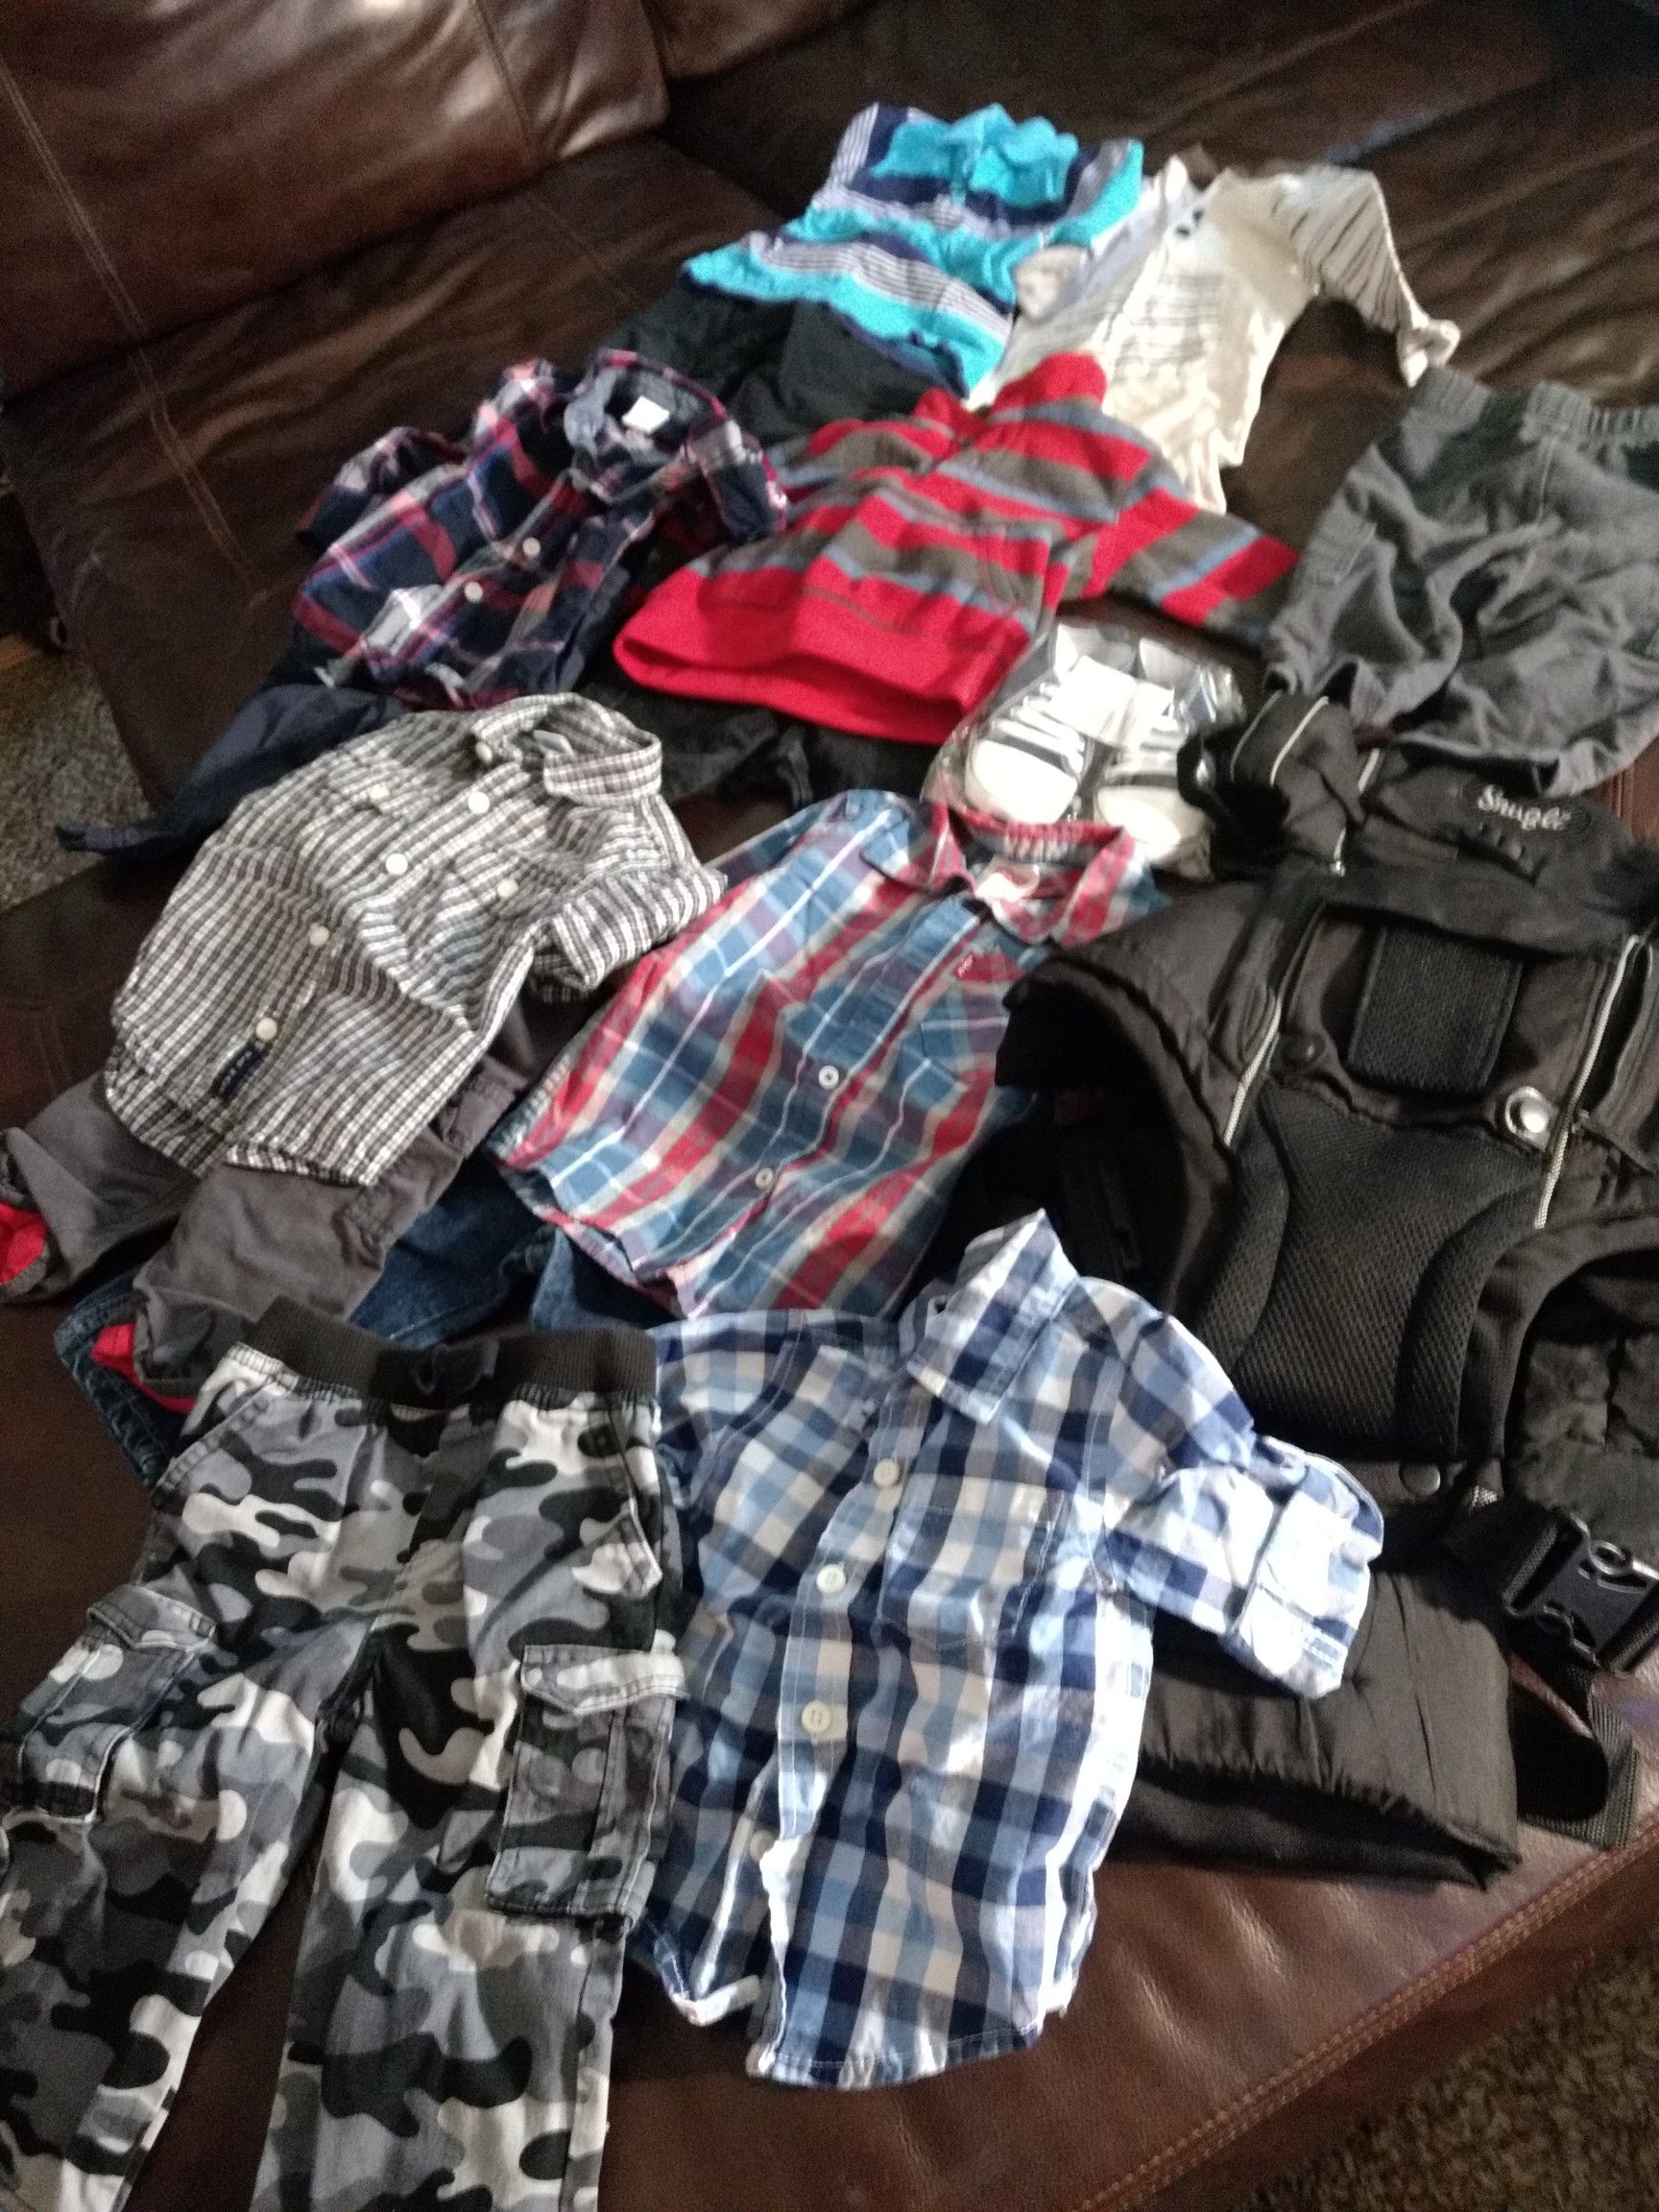 $40 takes all near new Quality & name brand baby clothes, Snuggie and shoes. Boys 12 to 18 months.